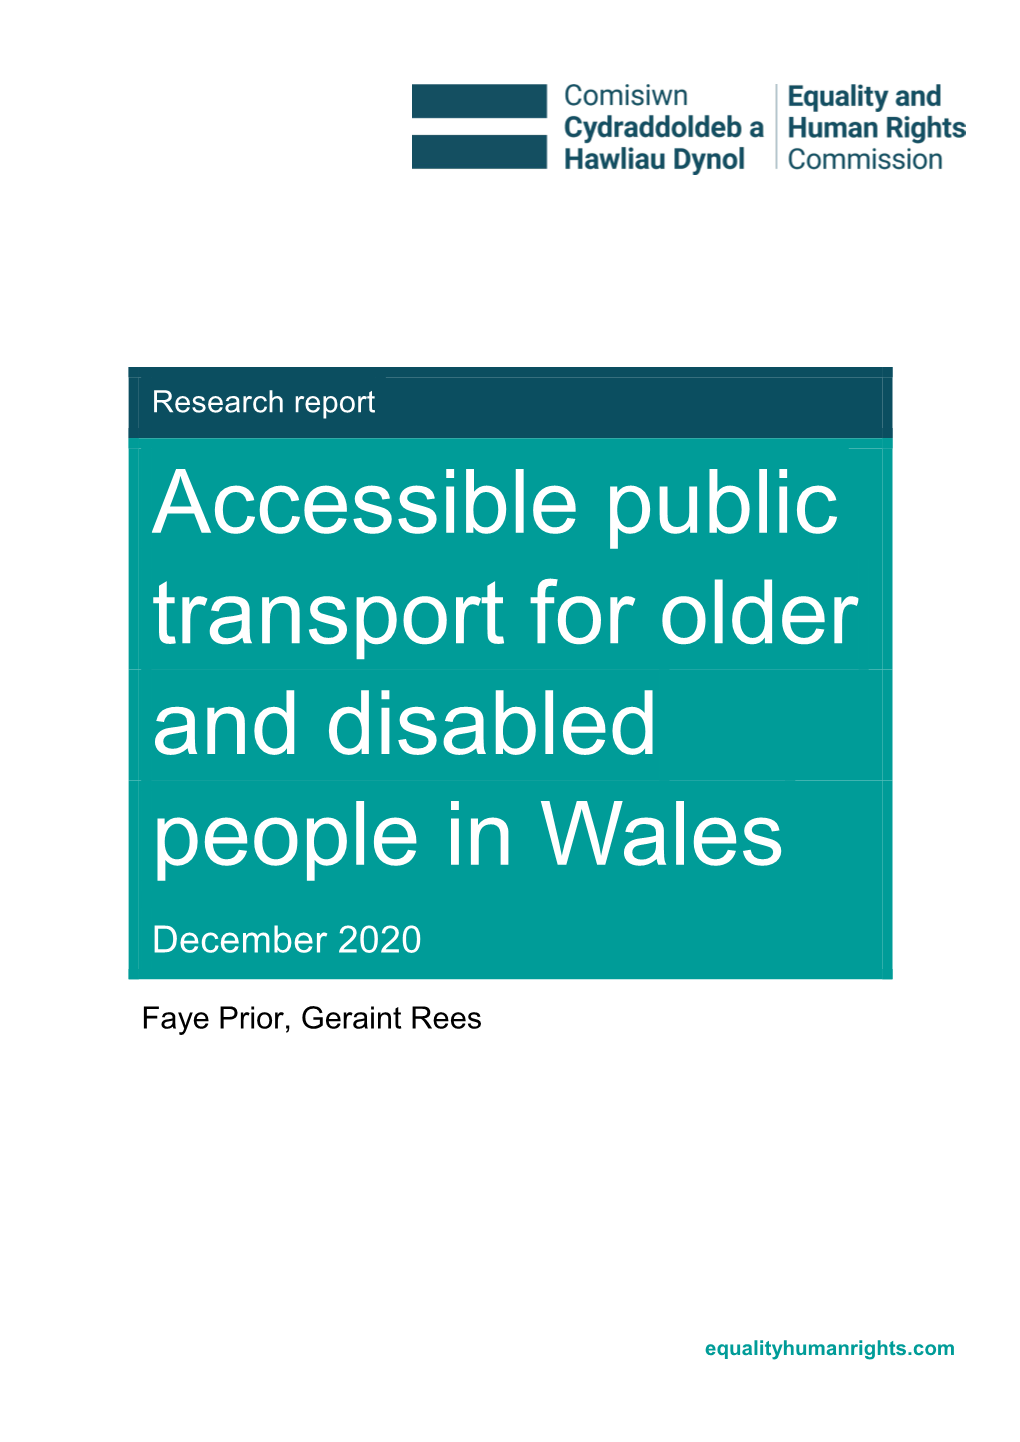 Accessible Public Transport for Older and Disabled People in Wales December 2020